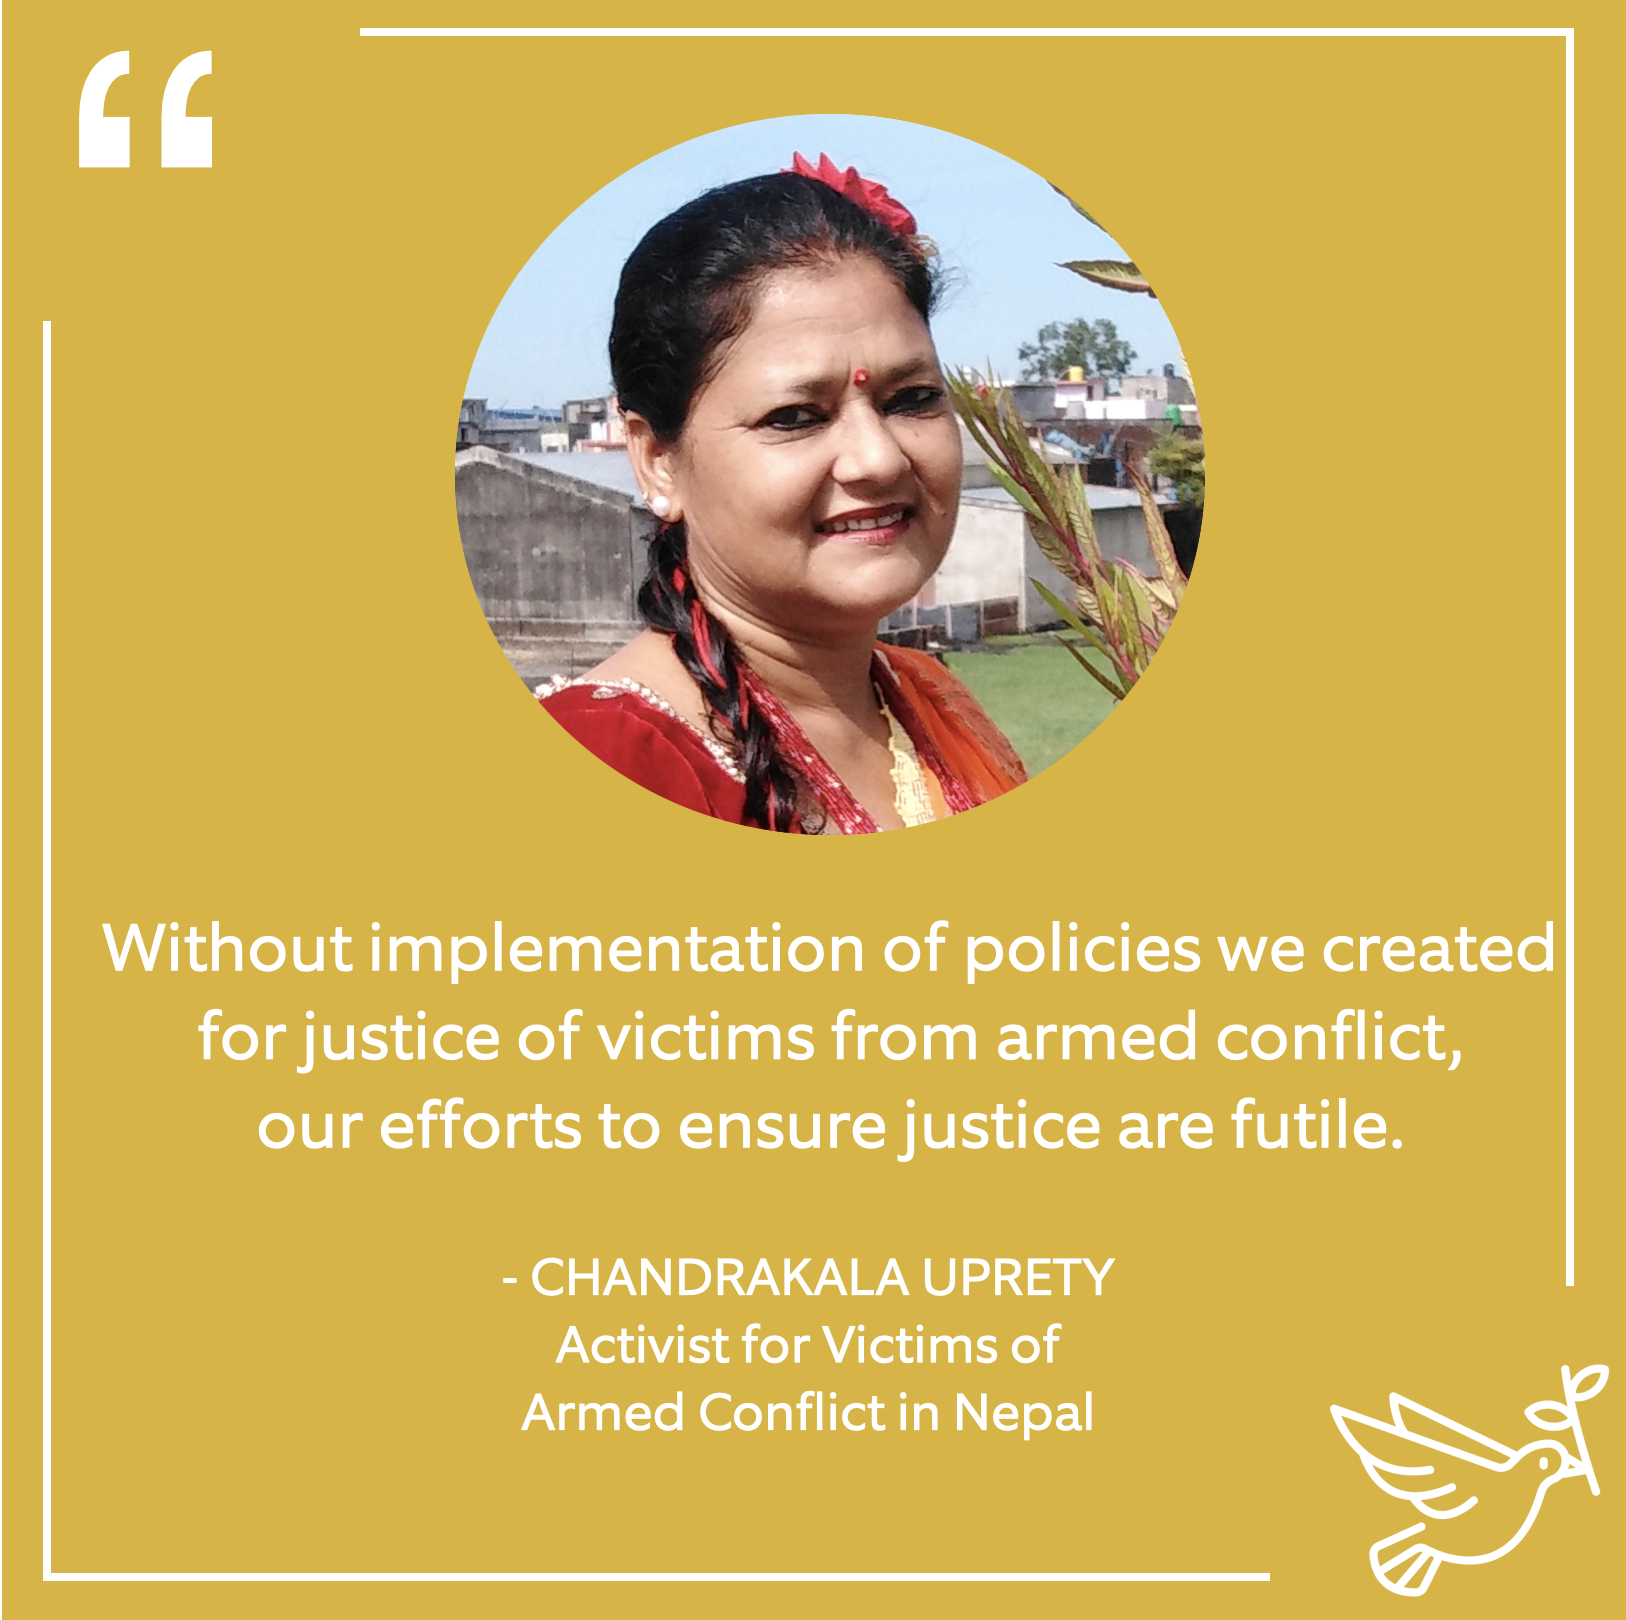 Chandrakala Uprety, Activist for Victims of the Armed Conflict in Nepal.